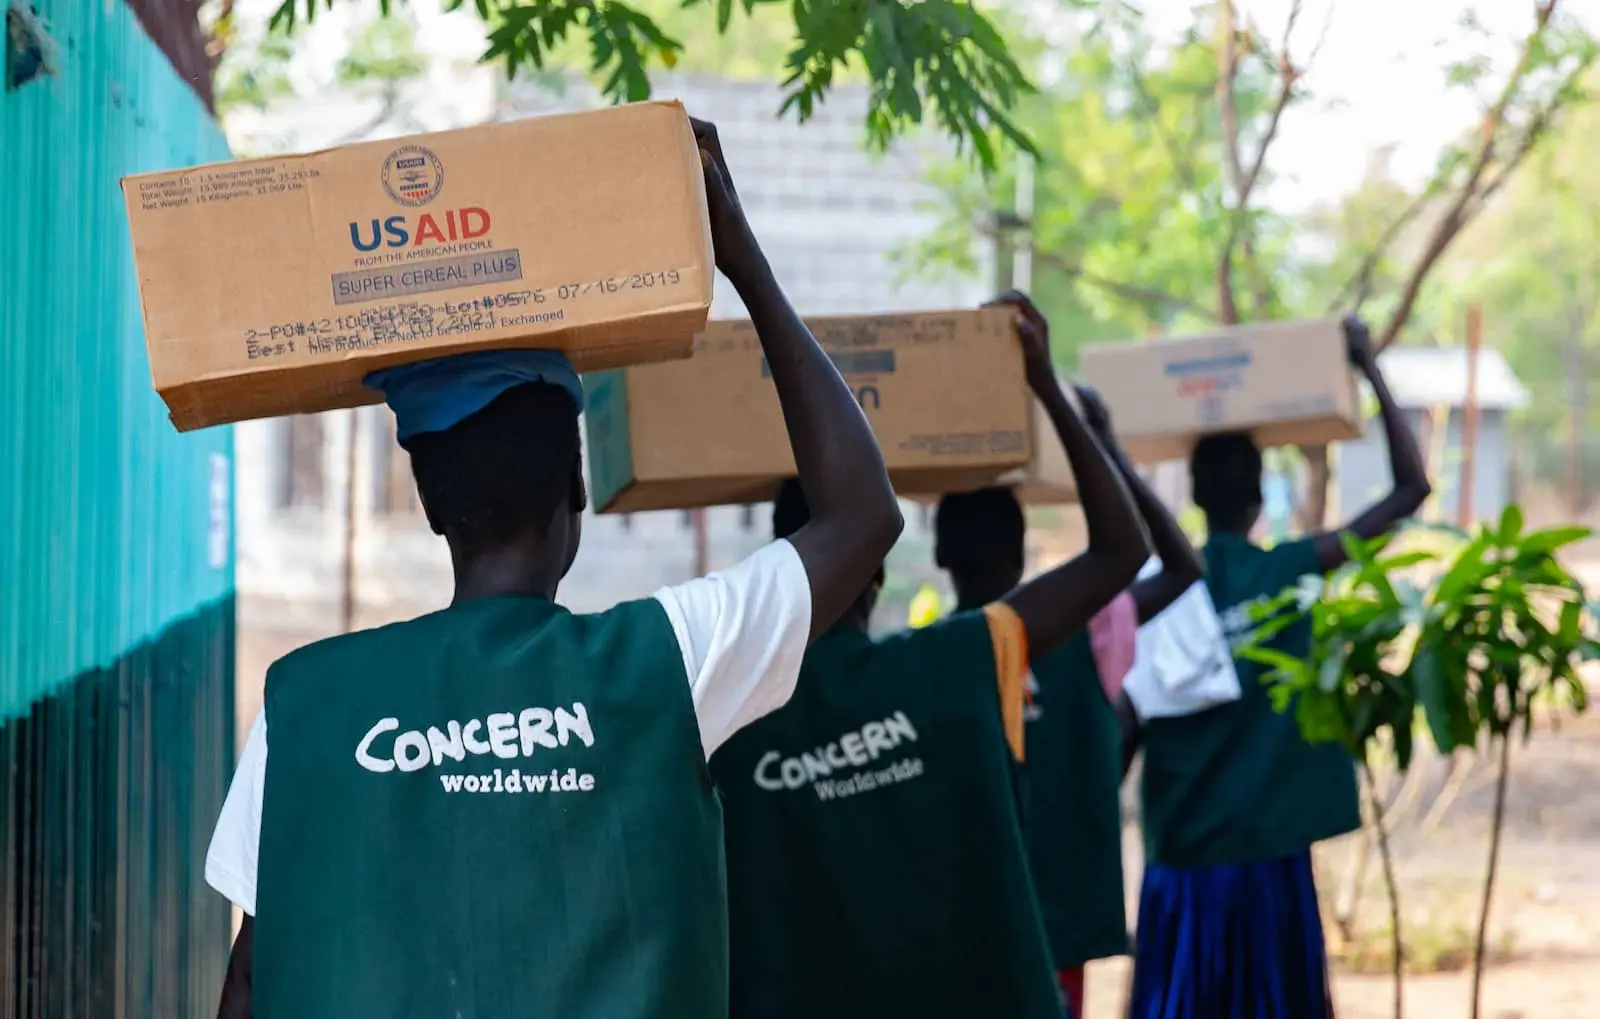 women in Concern vests carrying USAID materials